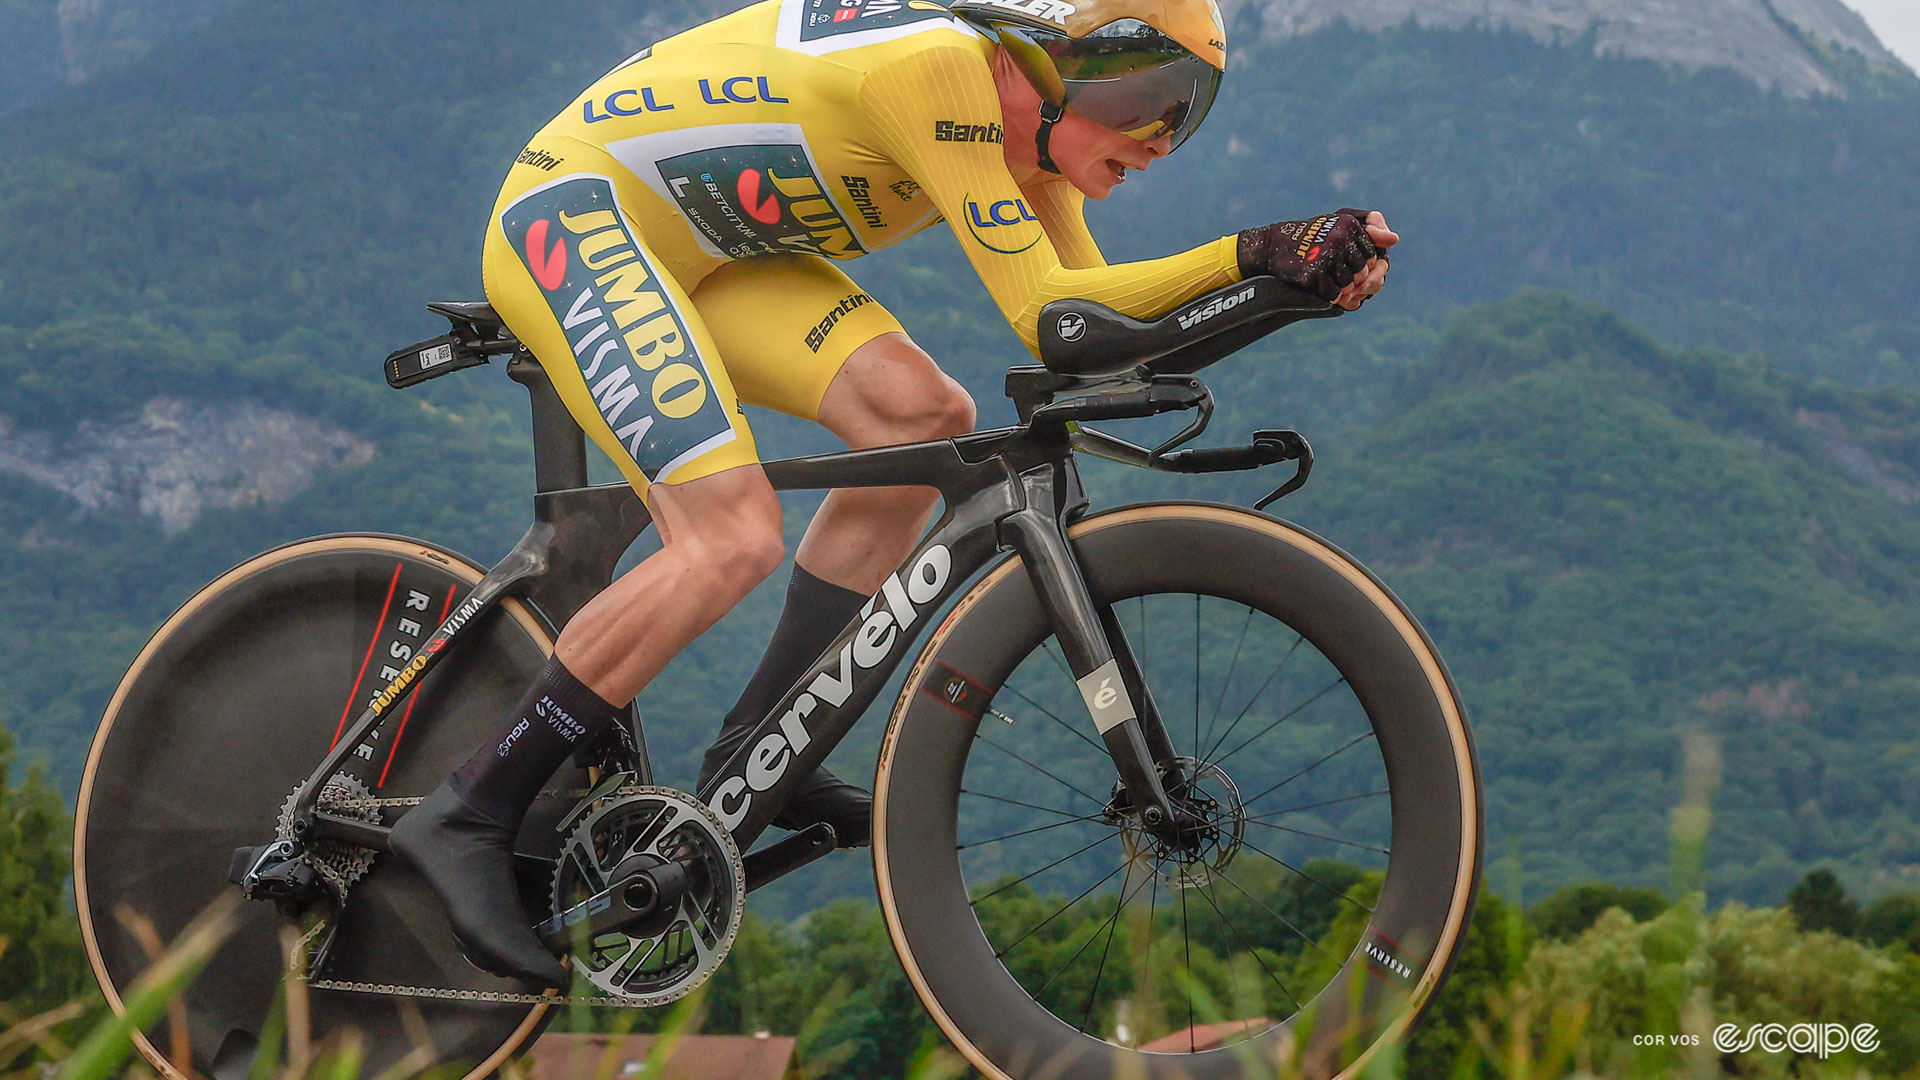 Jonas Vingegaard time trials in stage 16 of the 2023 Tour de France. Ronan's face is superimposed over Jonas's in an intentionally cringe photoshop.